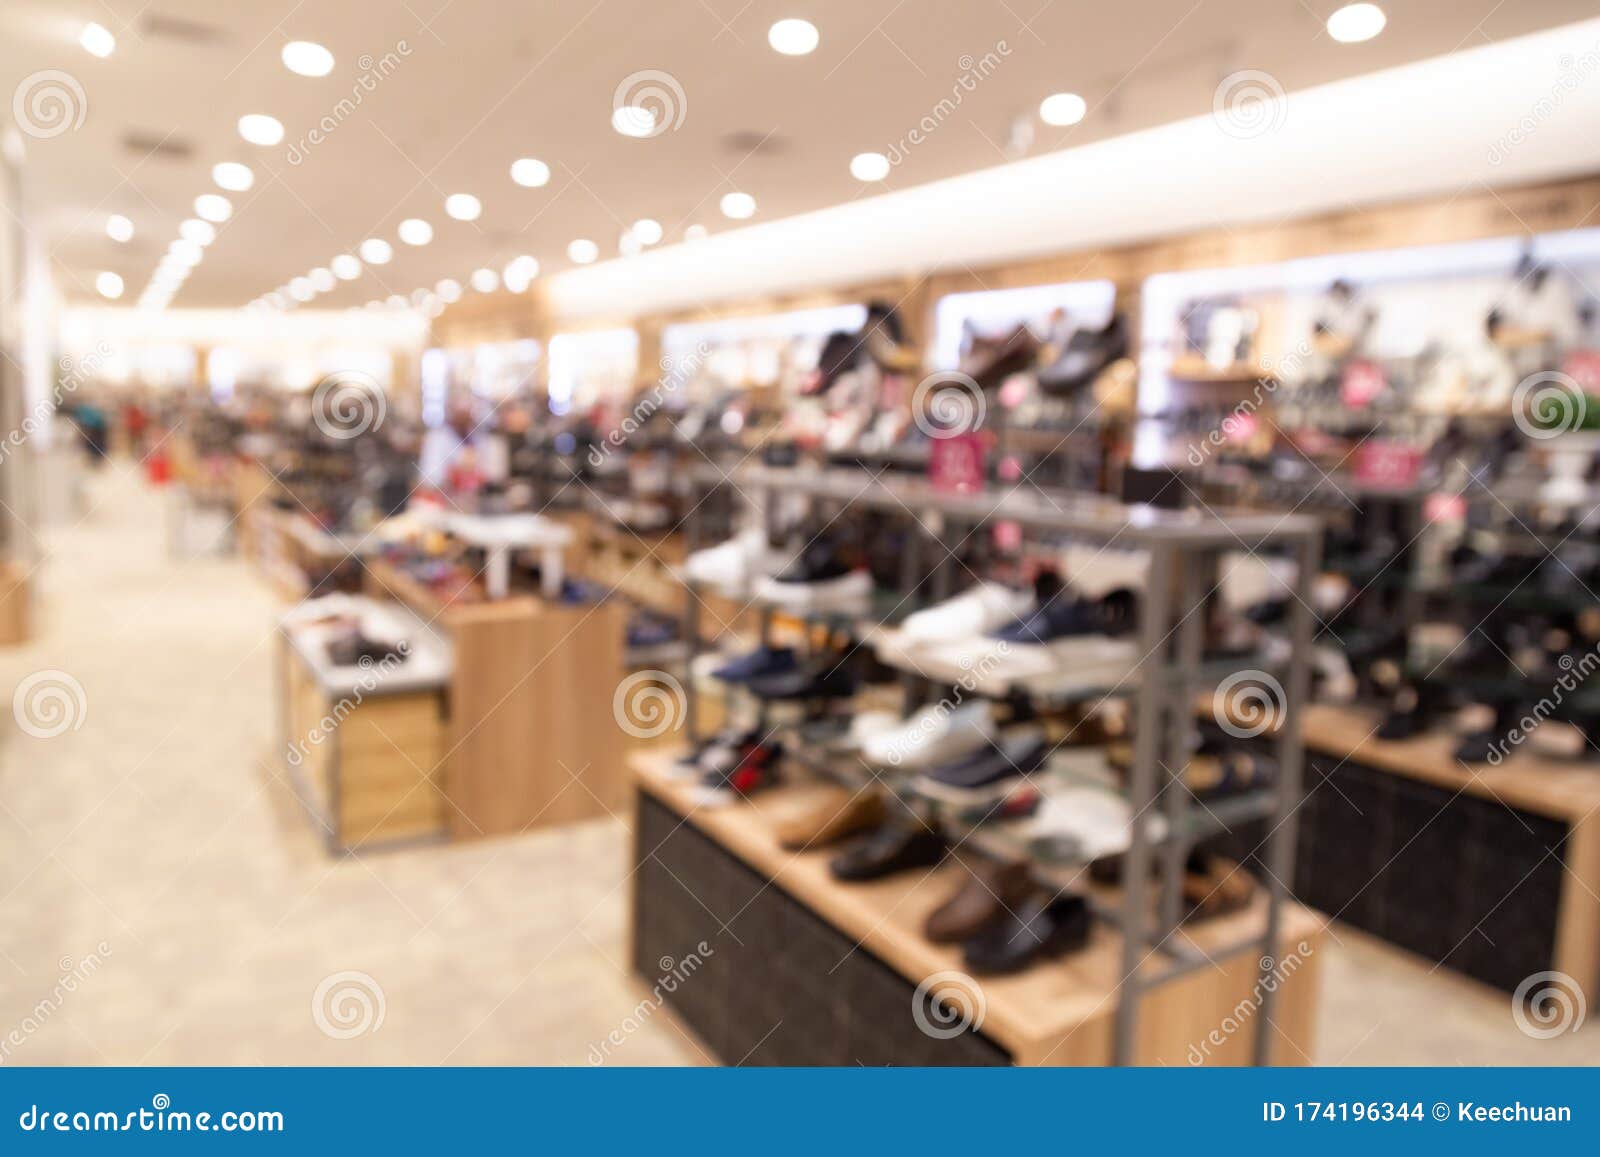 Blur Background of Shoe Footwear Section of Retail Shop Stock Photo ...